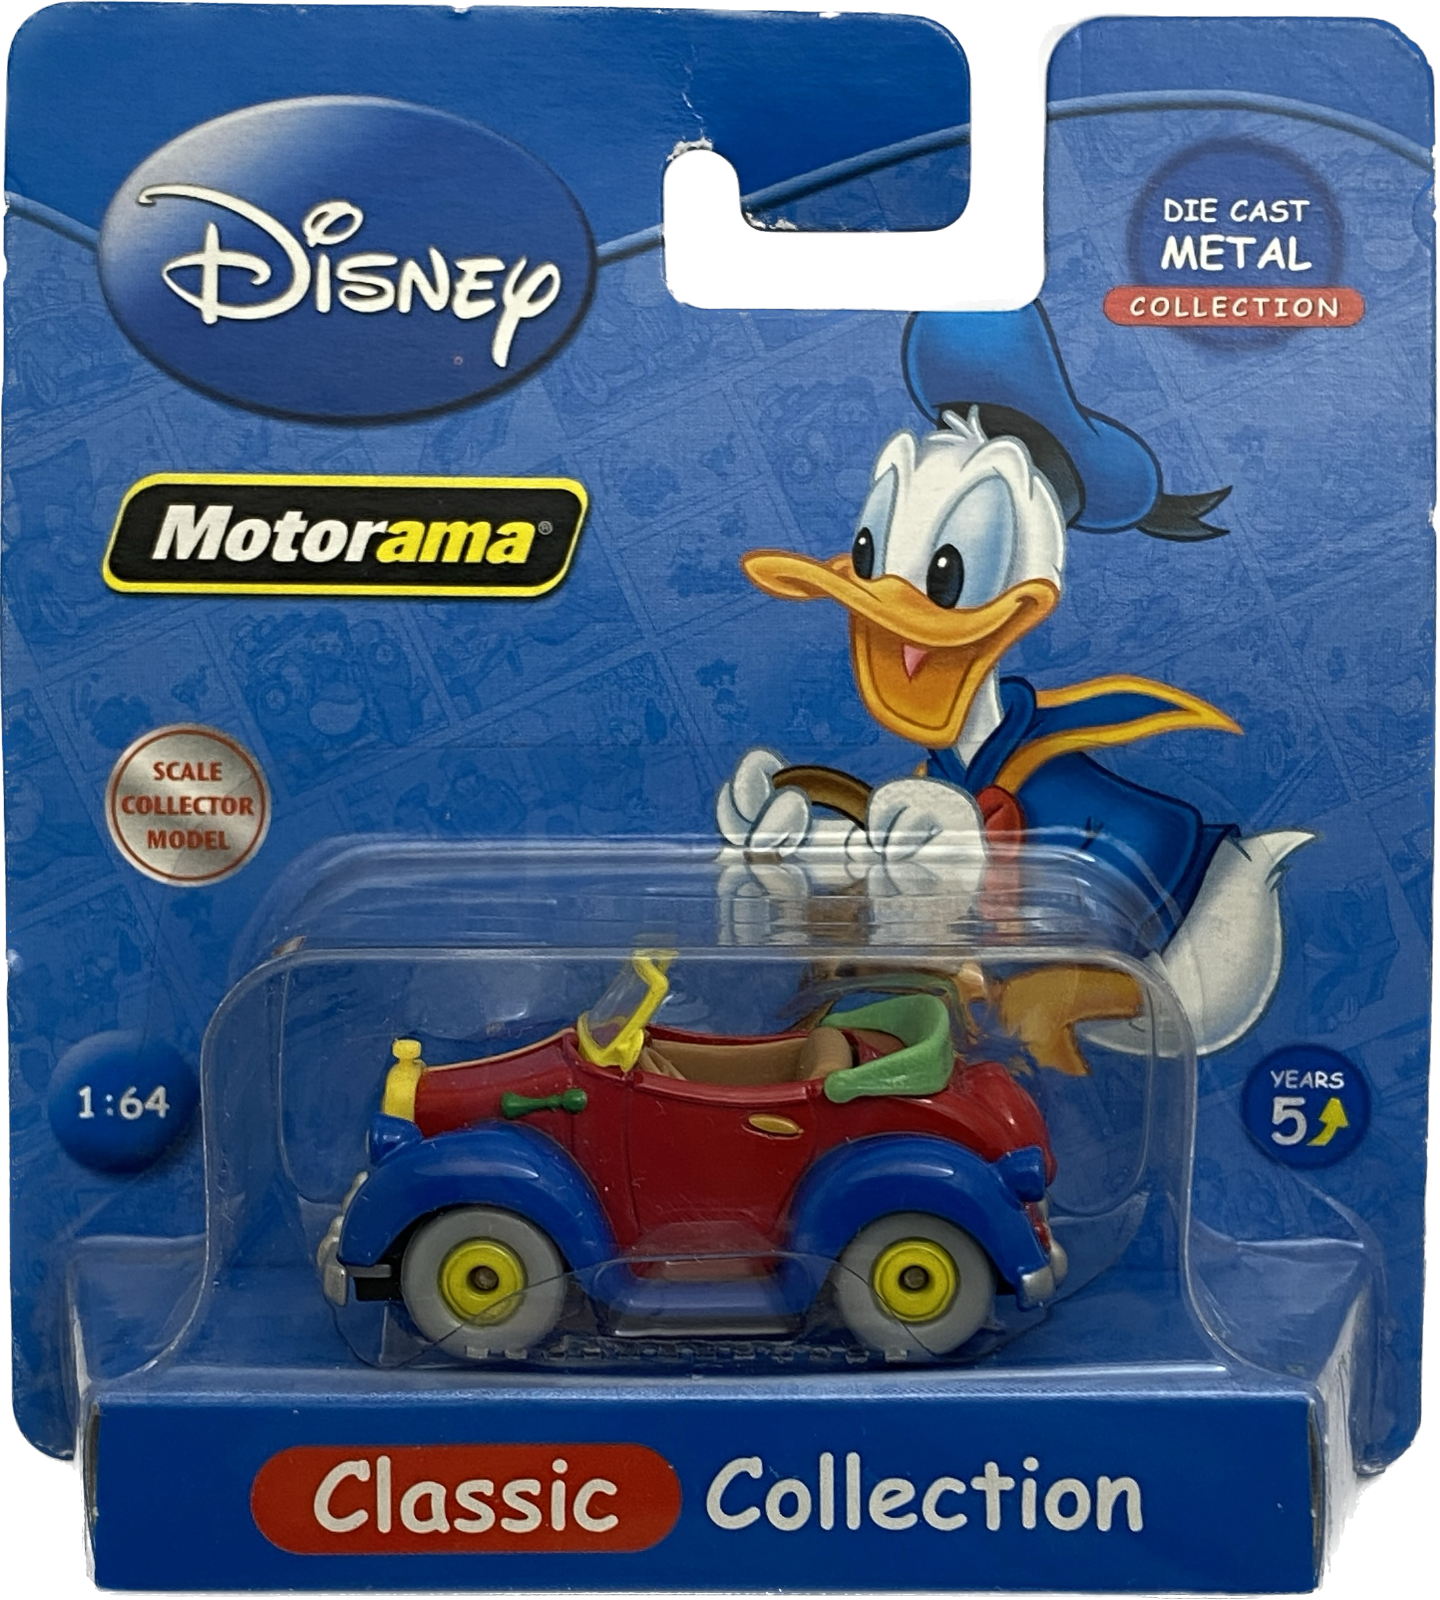 Donald Duck Car Disney Classic Collection 1:64 Scale Toy Car Motorama